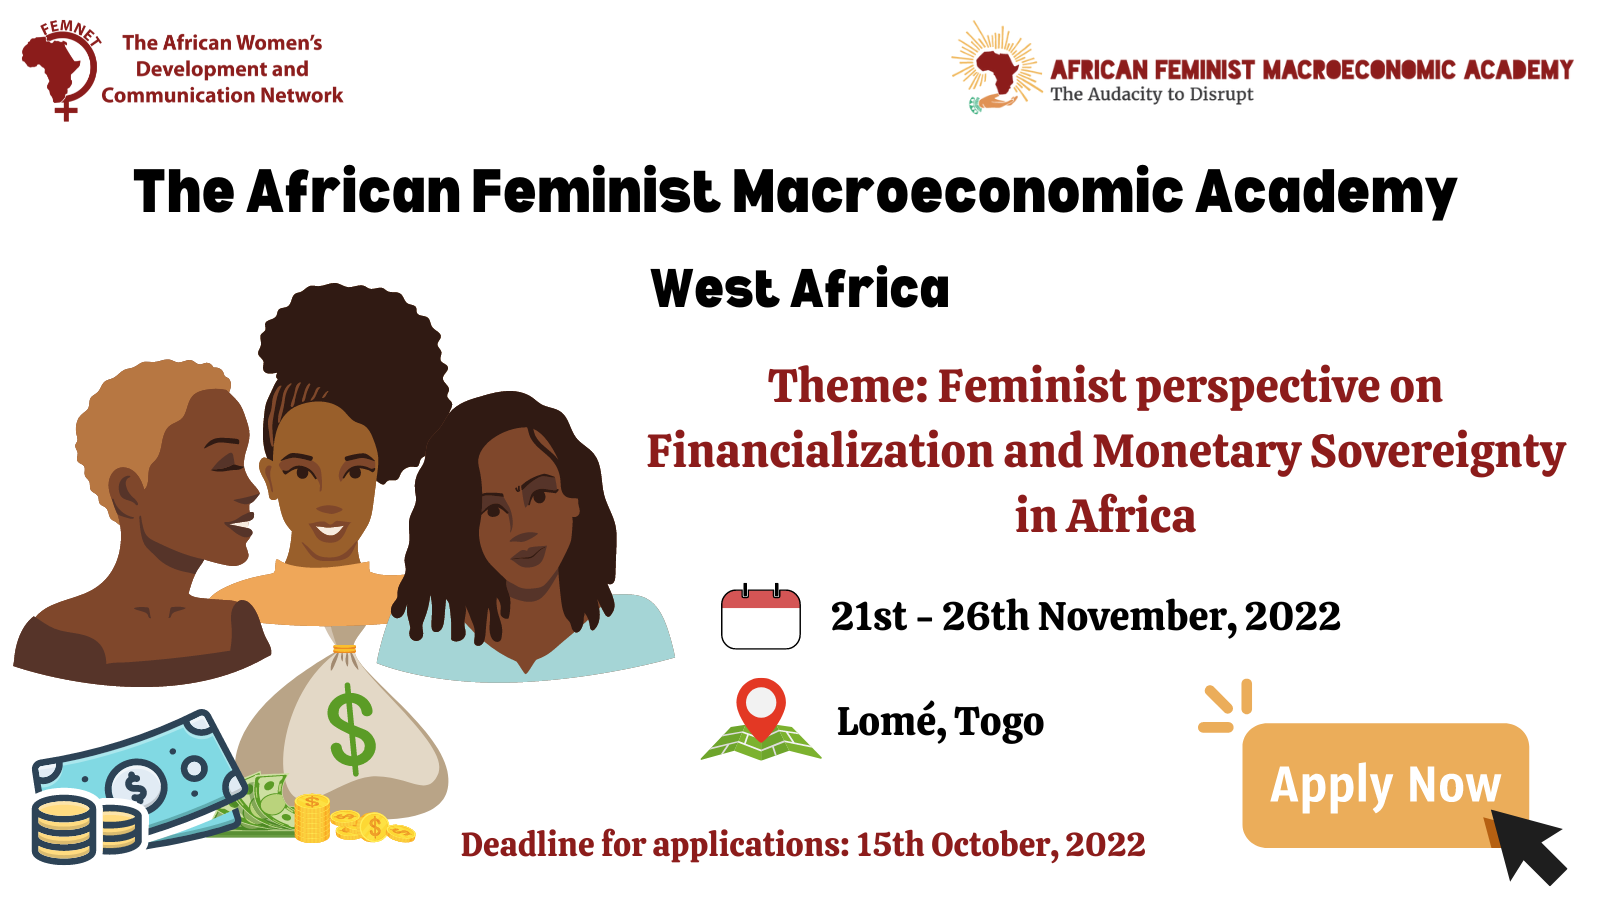 AFMA in West Africa: Call for Applications